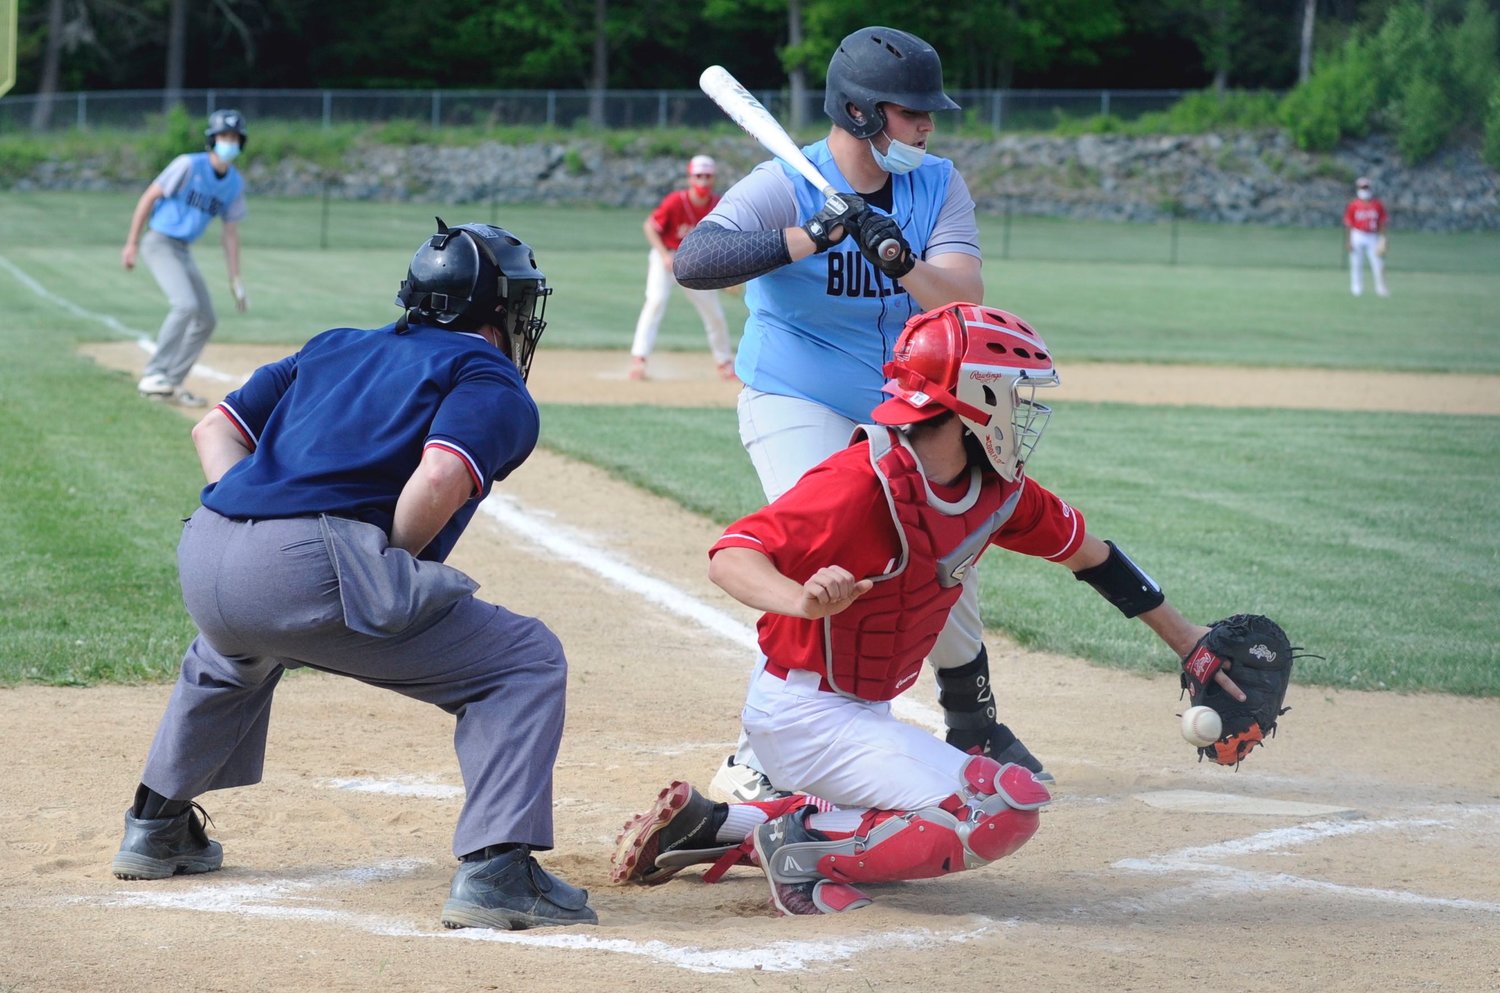 Owen Sager was named Sullivan West’s Co-Most Valuable Varsity Baseball Player for 2021 and received the Milt Gaebel Male Athlete award. In addition to the sport of swats, he played basketball.